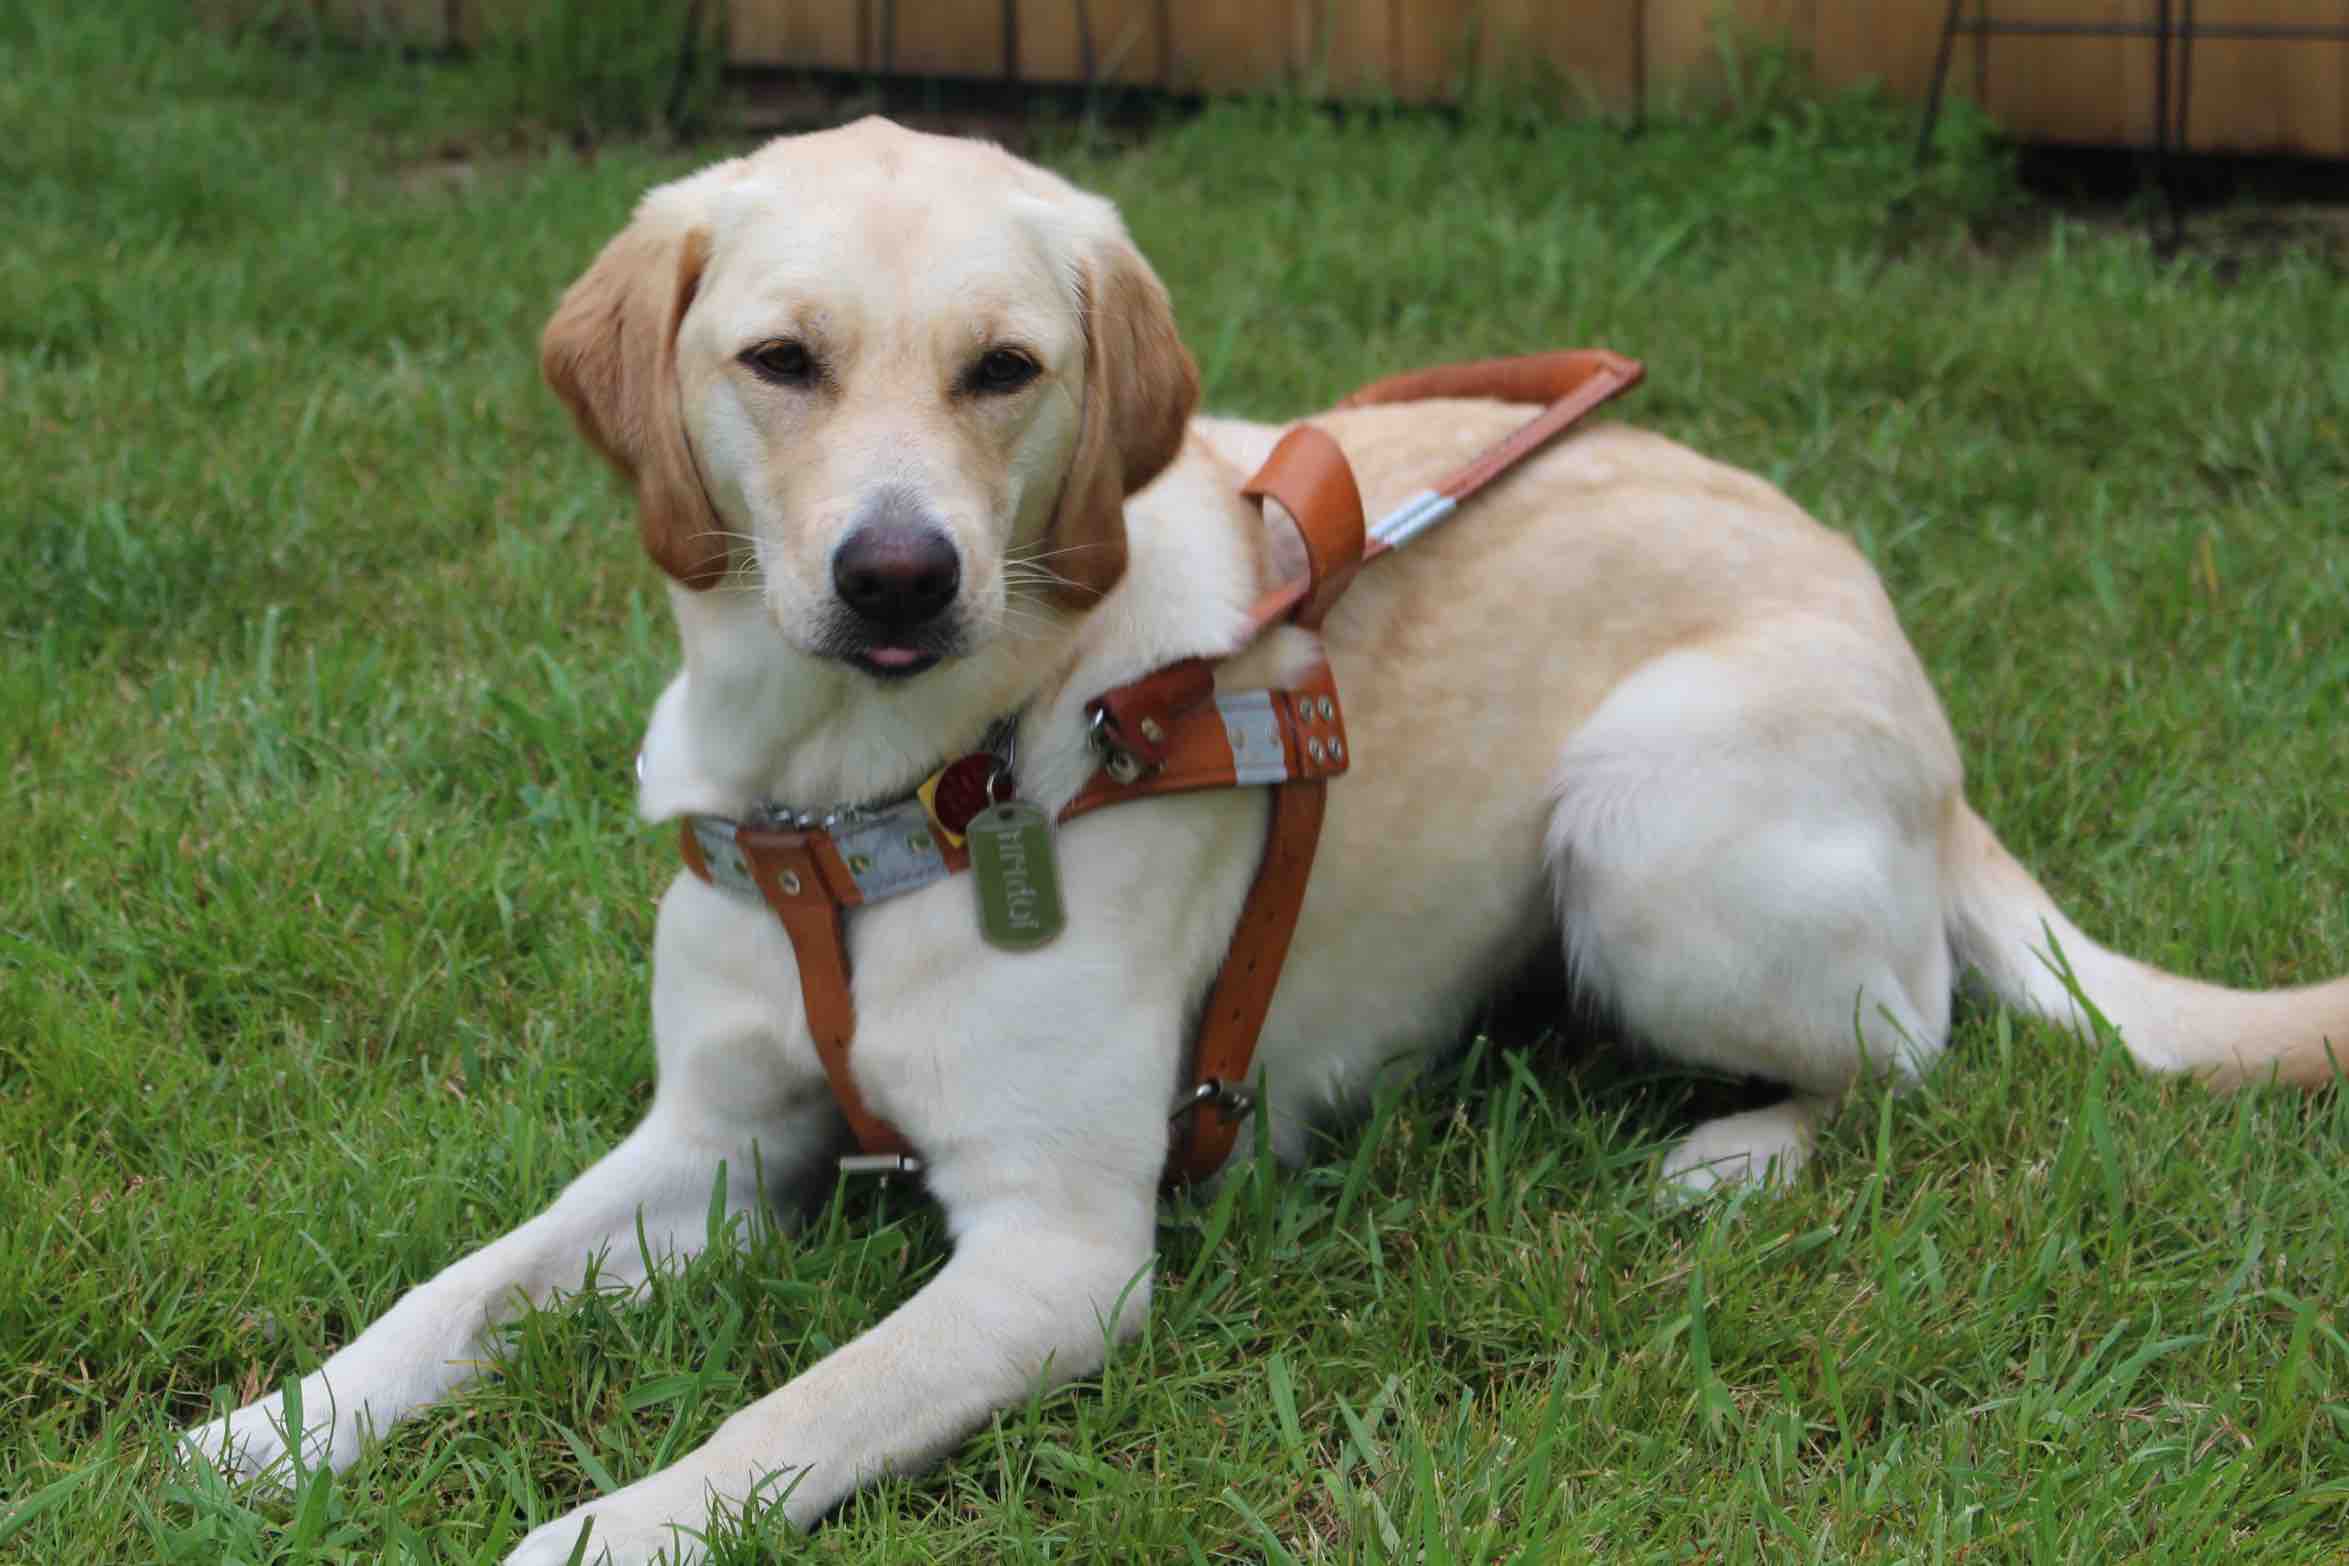 Colleen's Seeing Eye Dog, a golden retriever and yellow lab cross, lays in grass